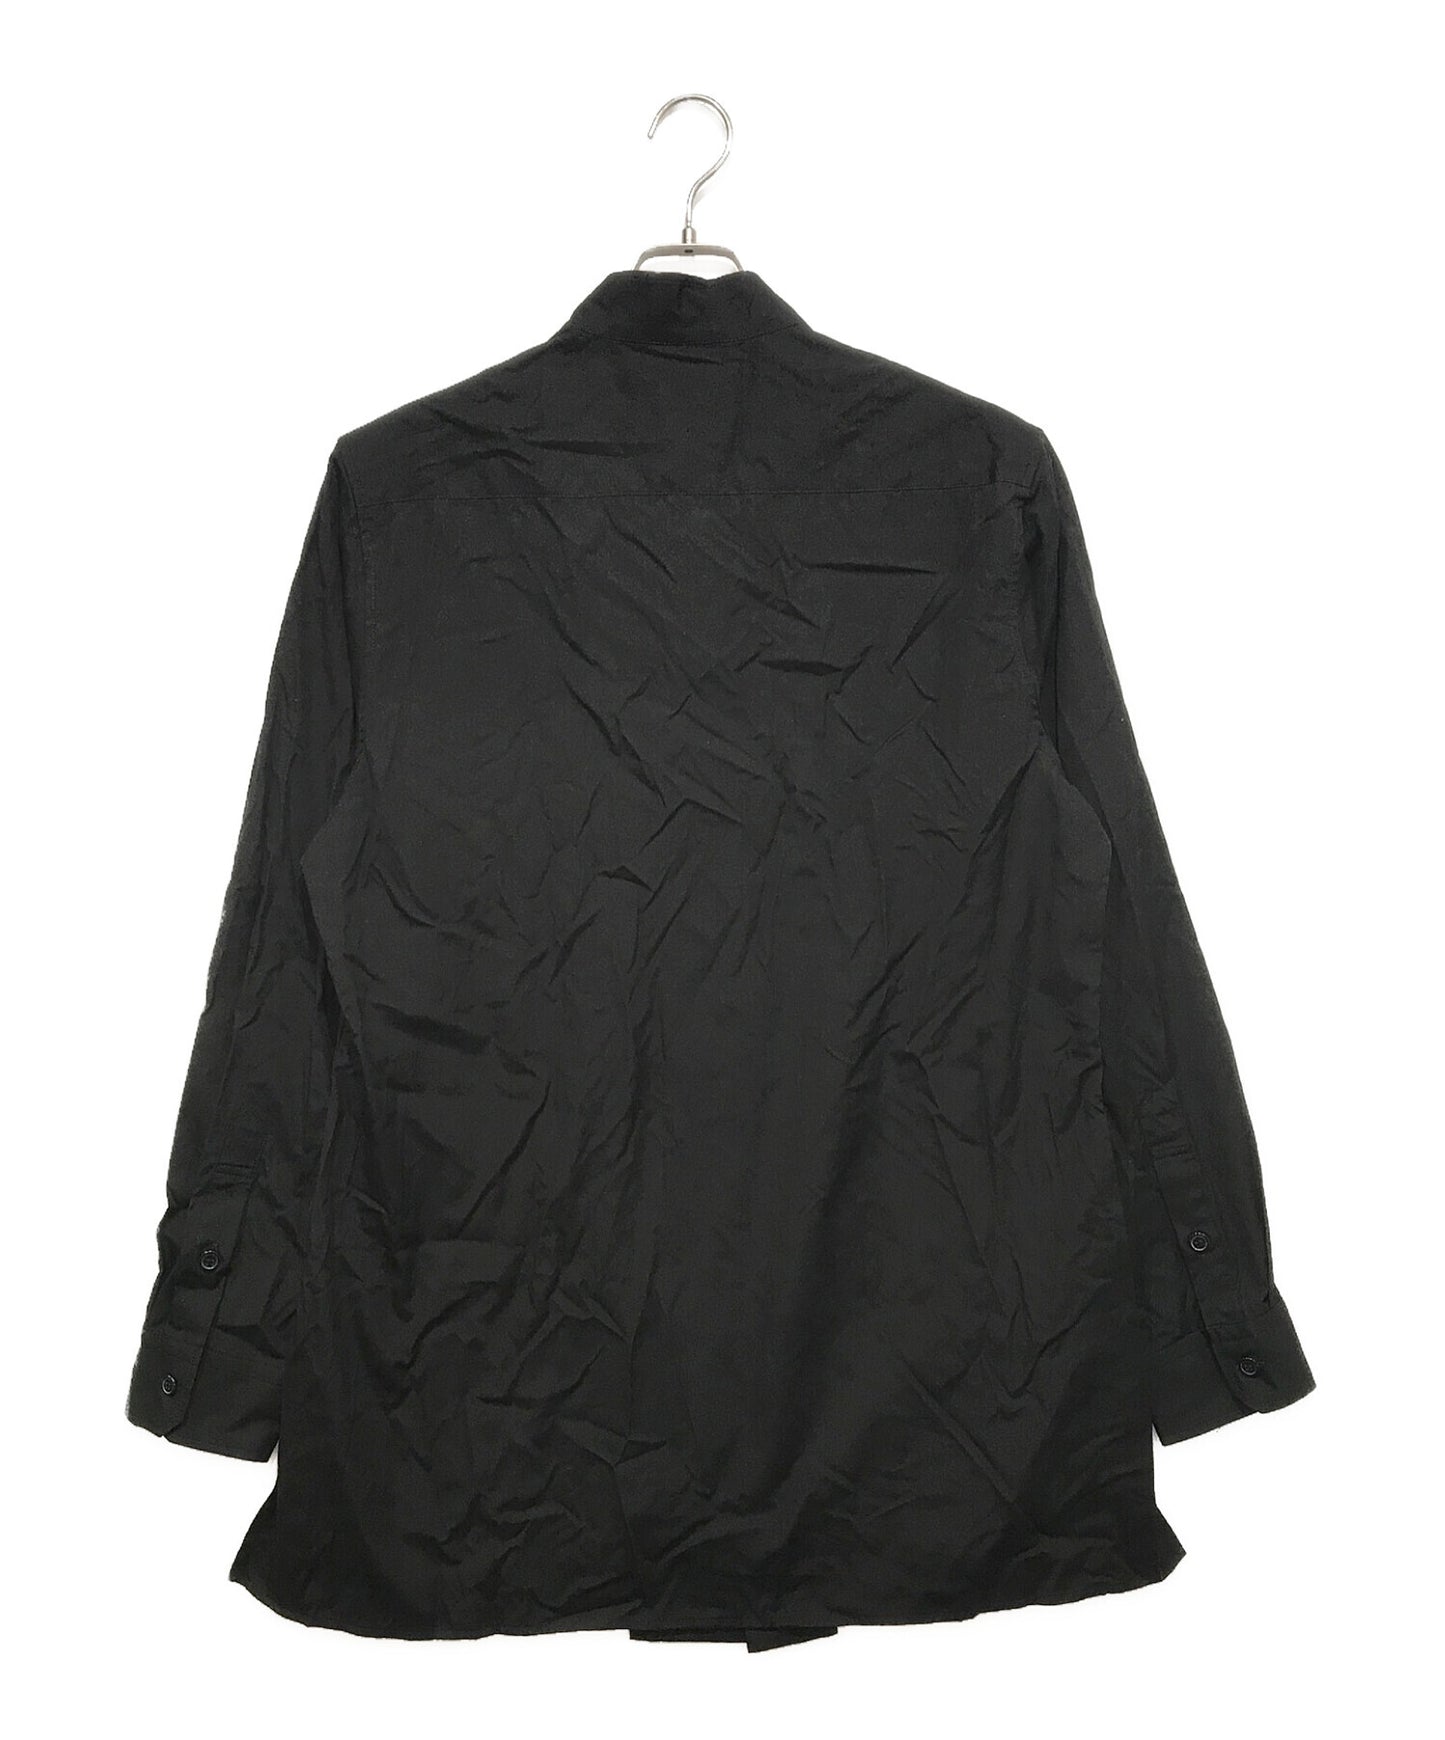 [Pre-owned] Yohji Yamamoto pour homme stand-up collar shirt HR-B20-053